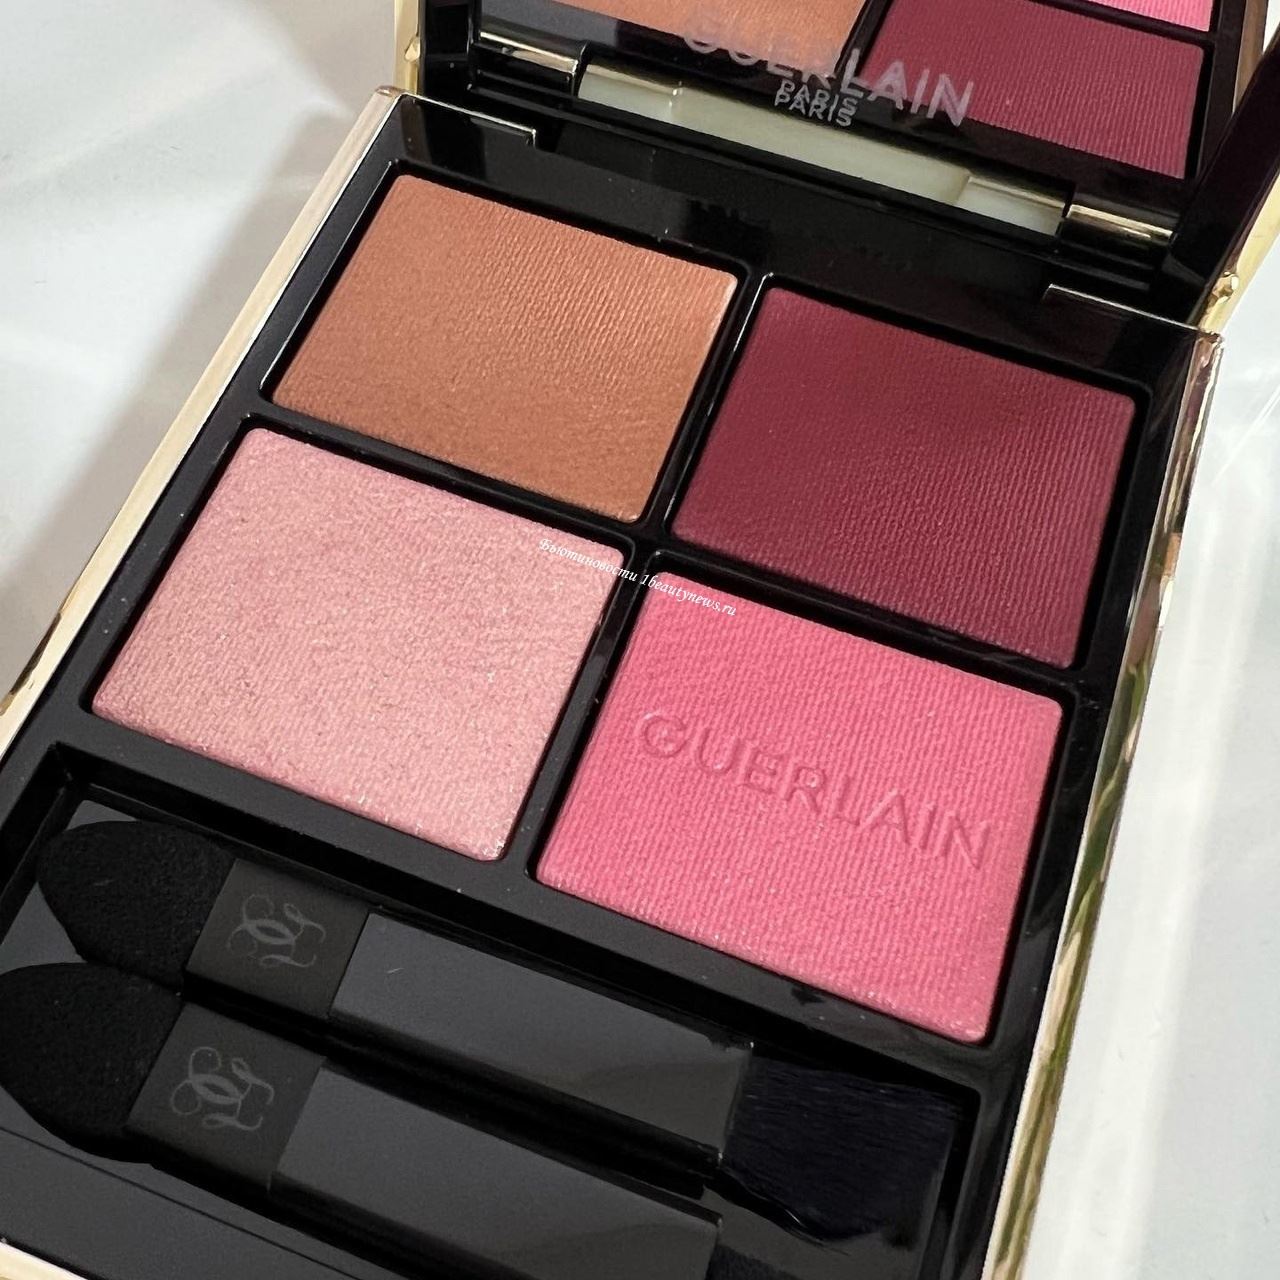 Guerlain Ombres G Eyeshadow Palette 2022 - 530 Majestic Rose - Swatches